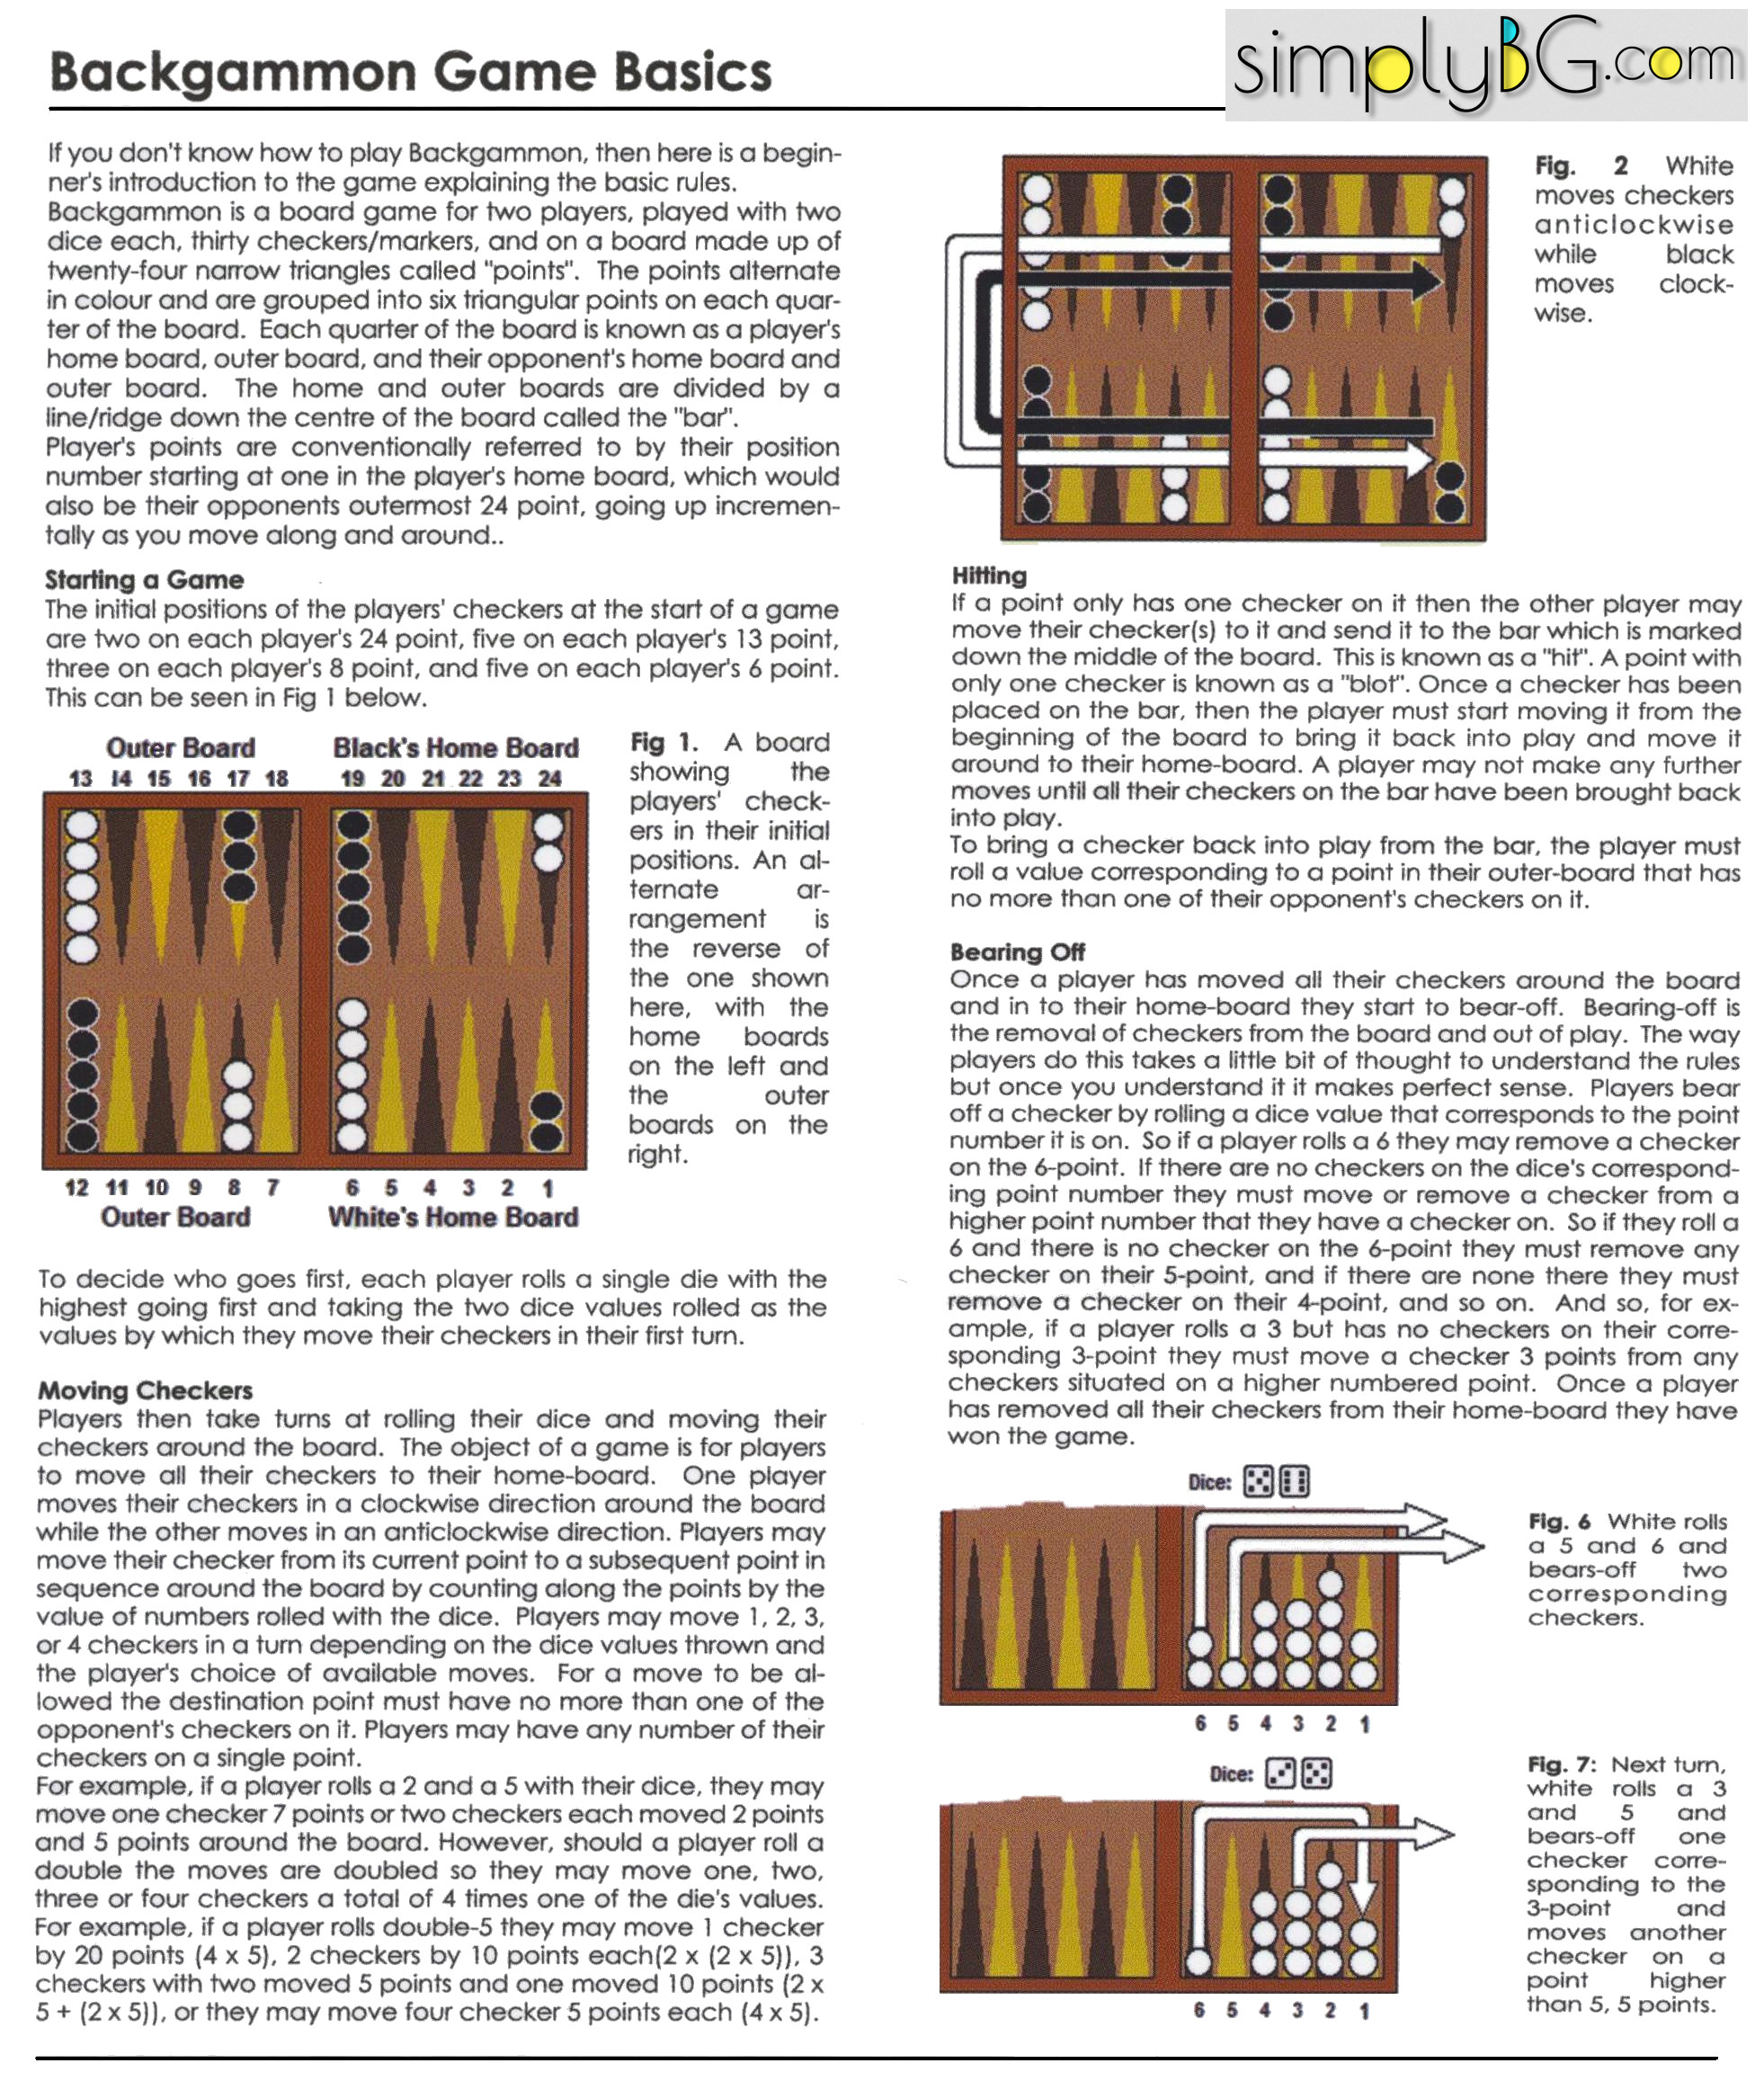 The very basic rules of Backgammon